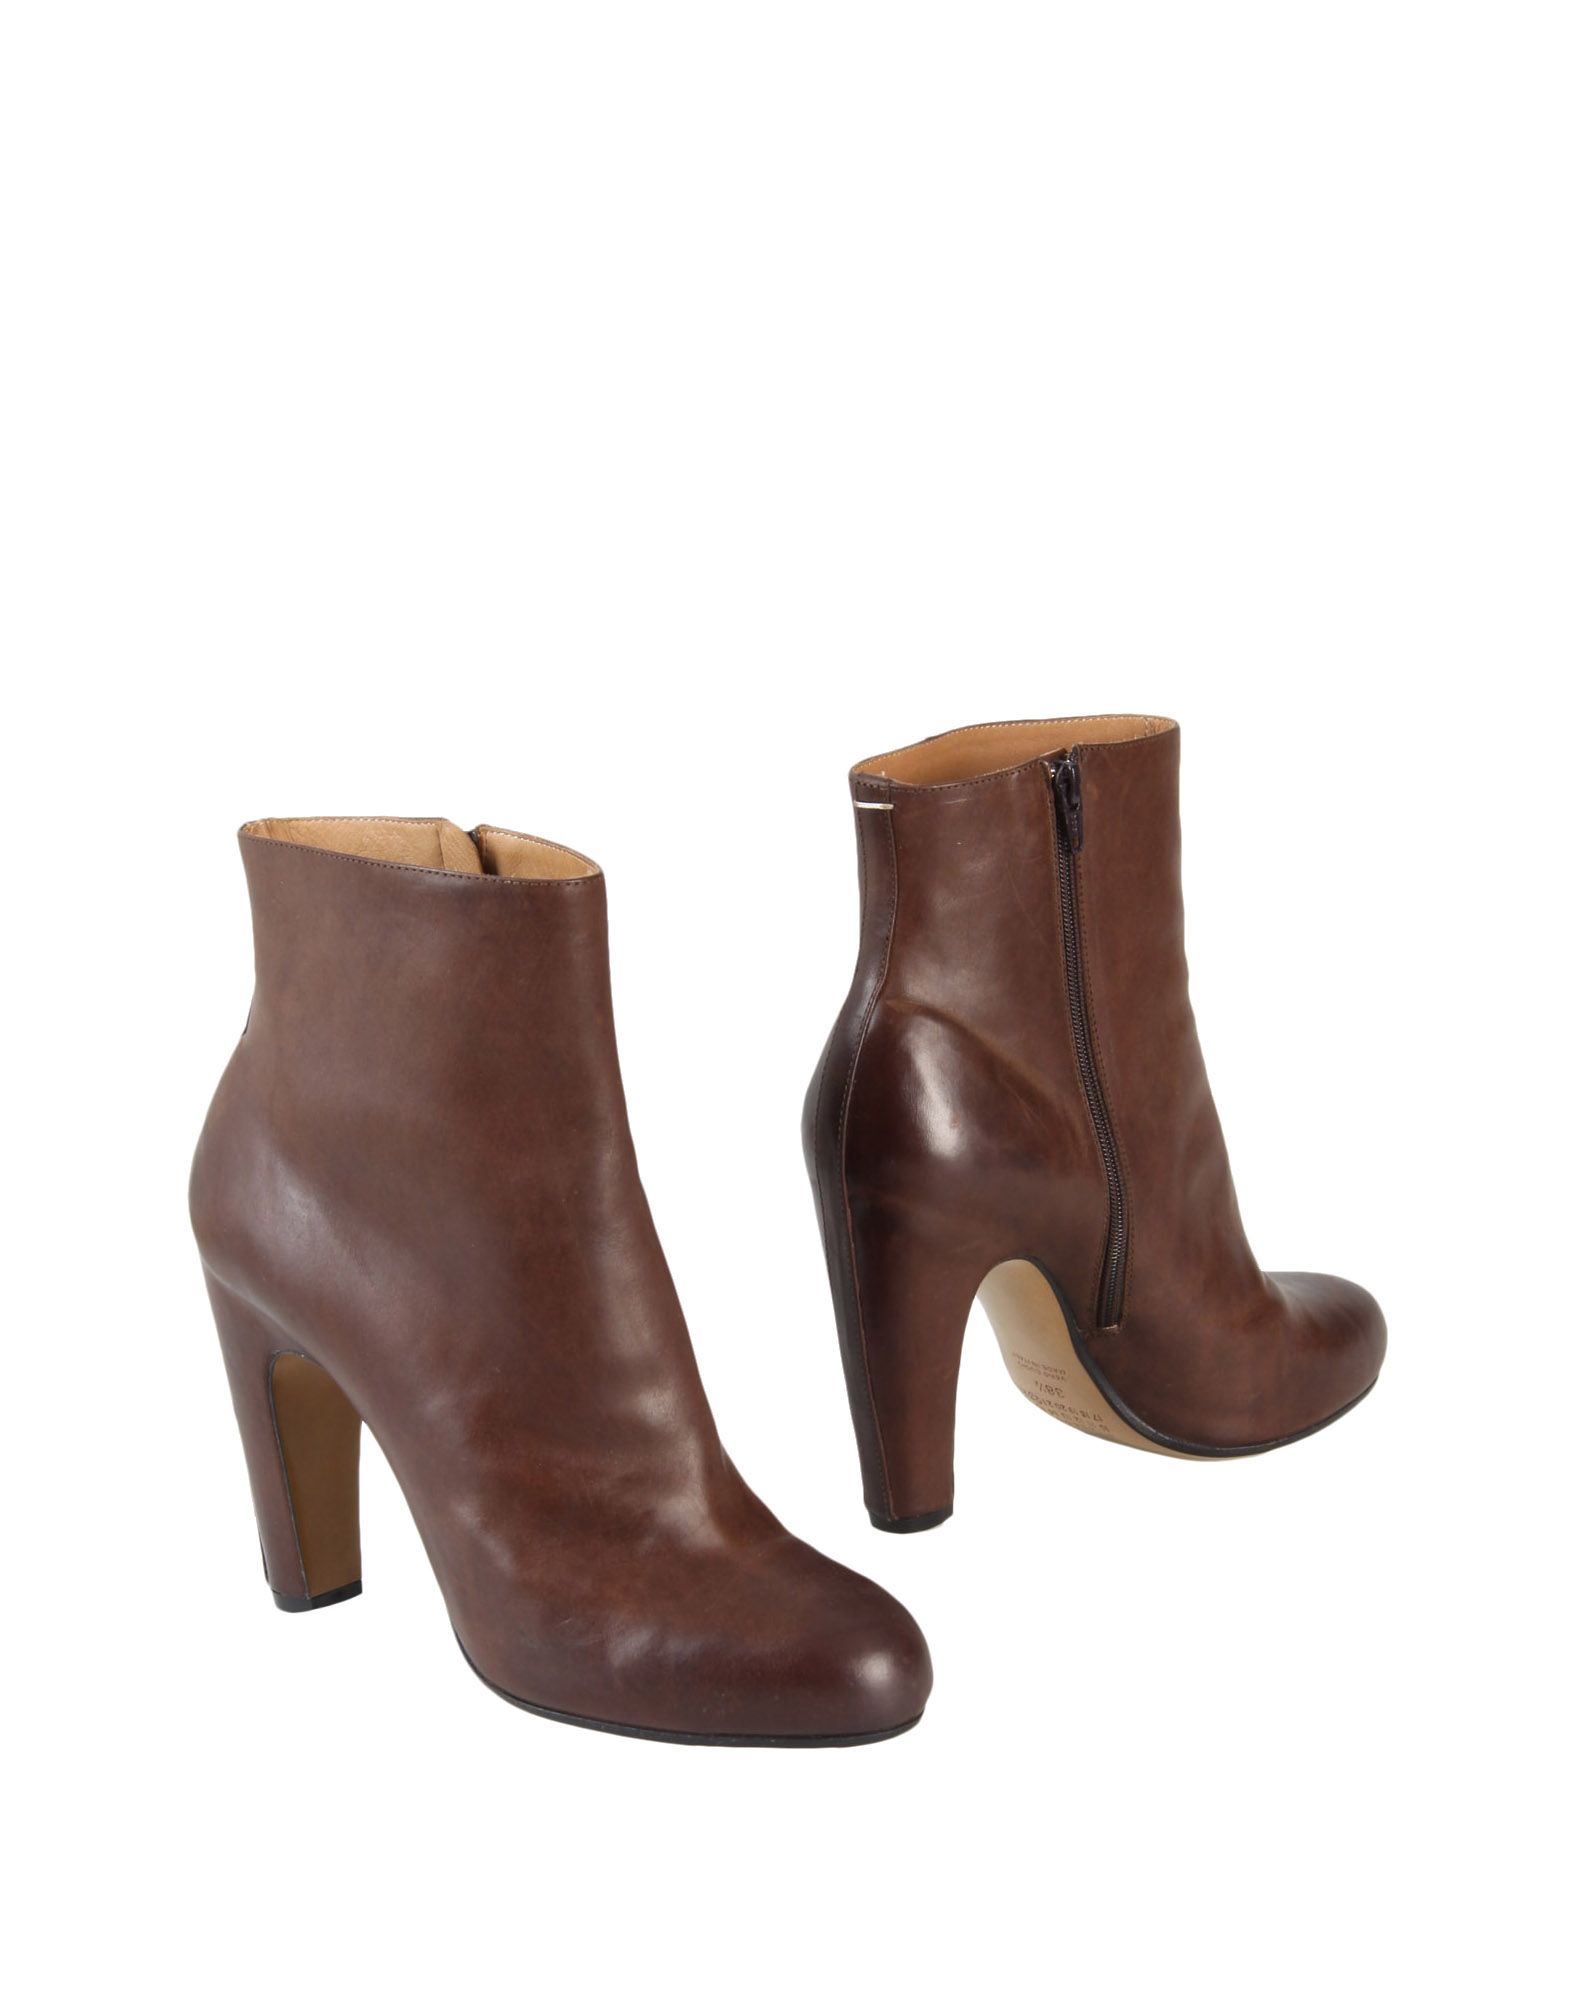 maison-martin-margiela-brown-ankle-boots-product-1-4206444-641128351.jpeg